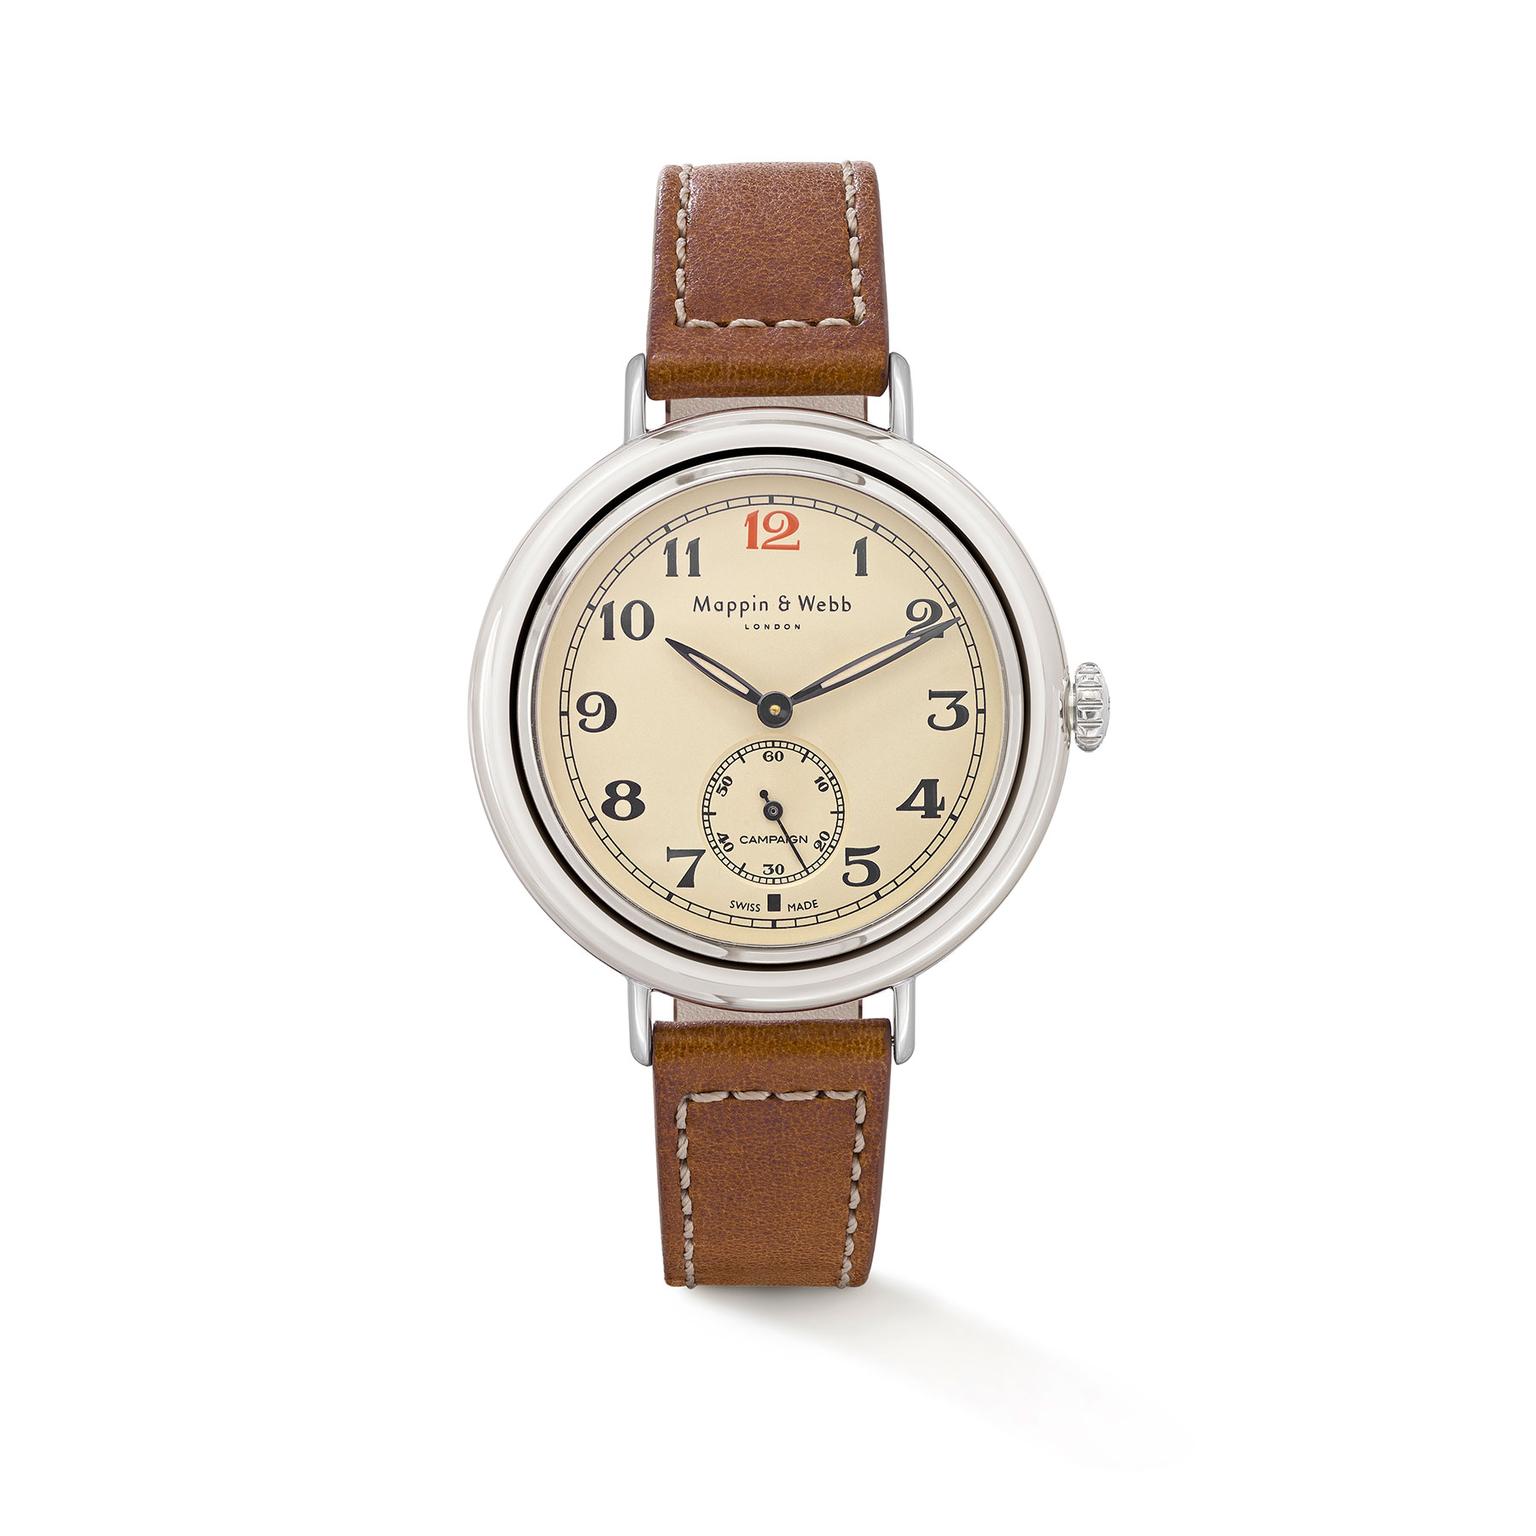 Mappin & Webb Campaign watch - limited edition